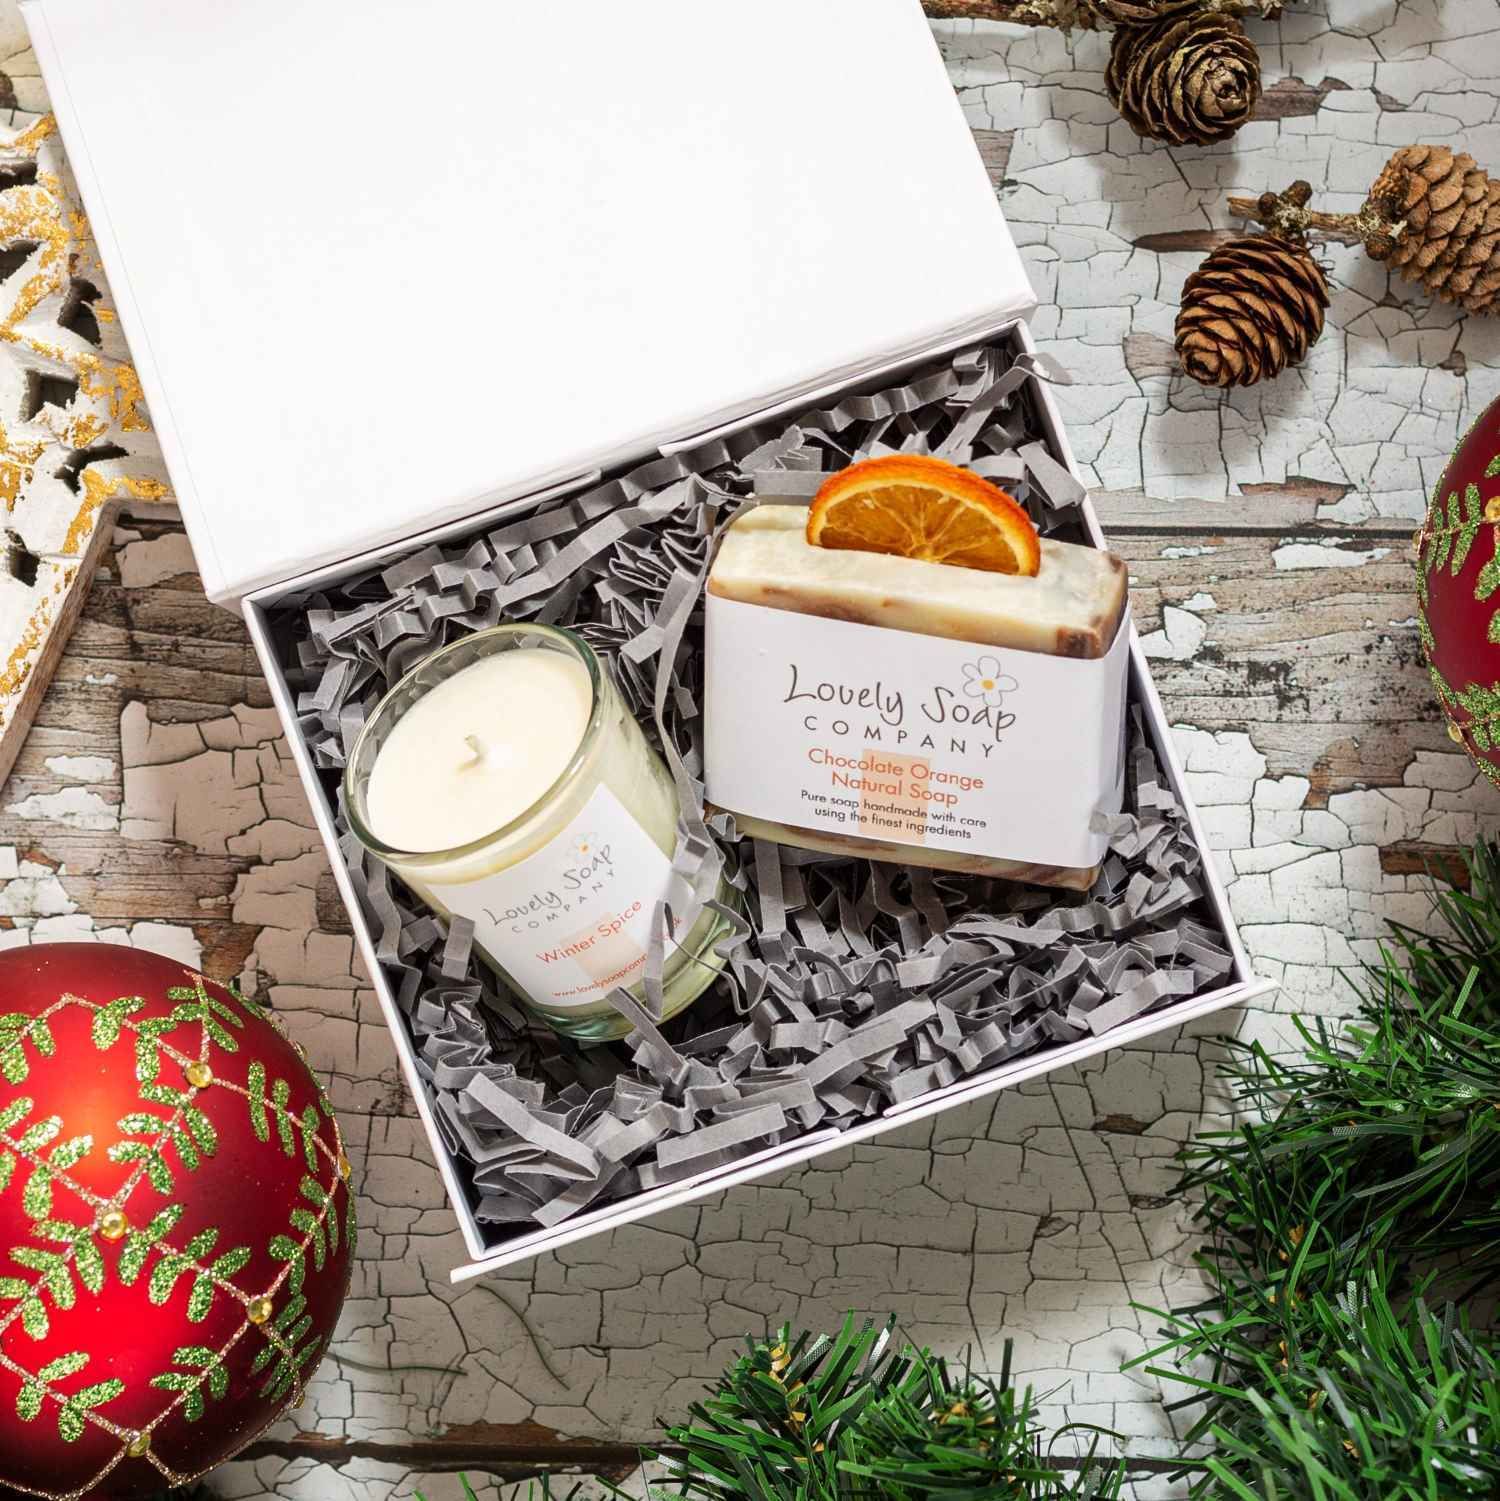 Chocolate Orange Xmas Pamper Gift with handmade natural soap and soy wax candle by Lovely Soap Co